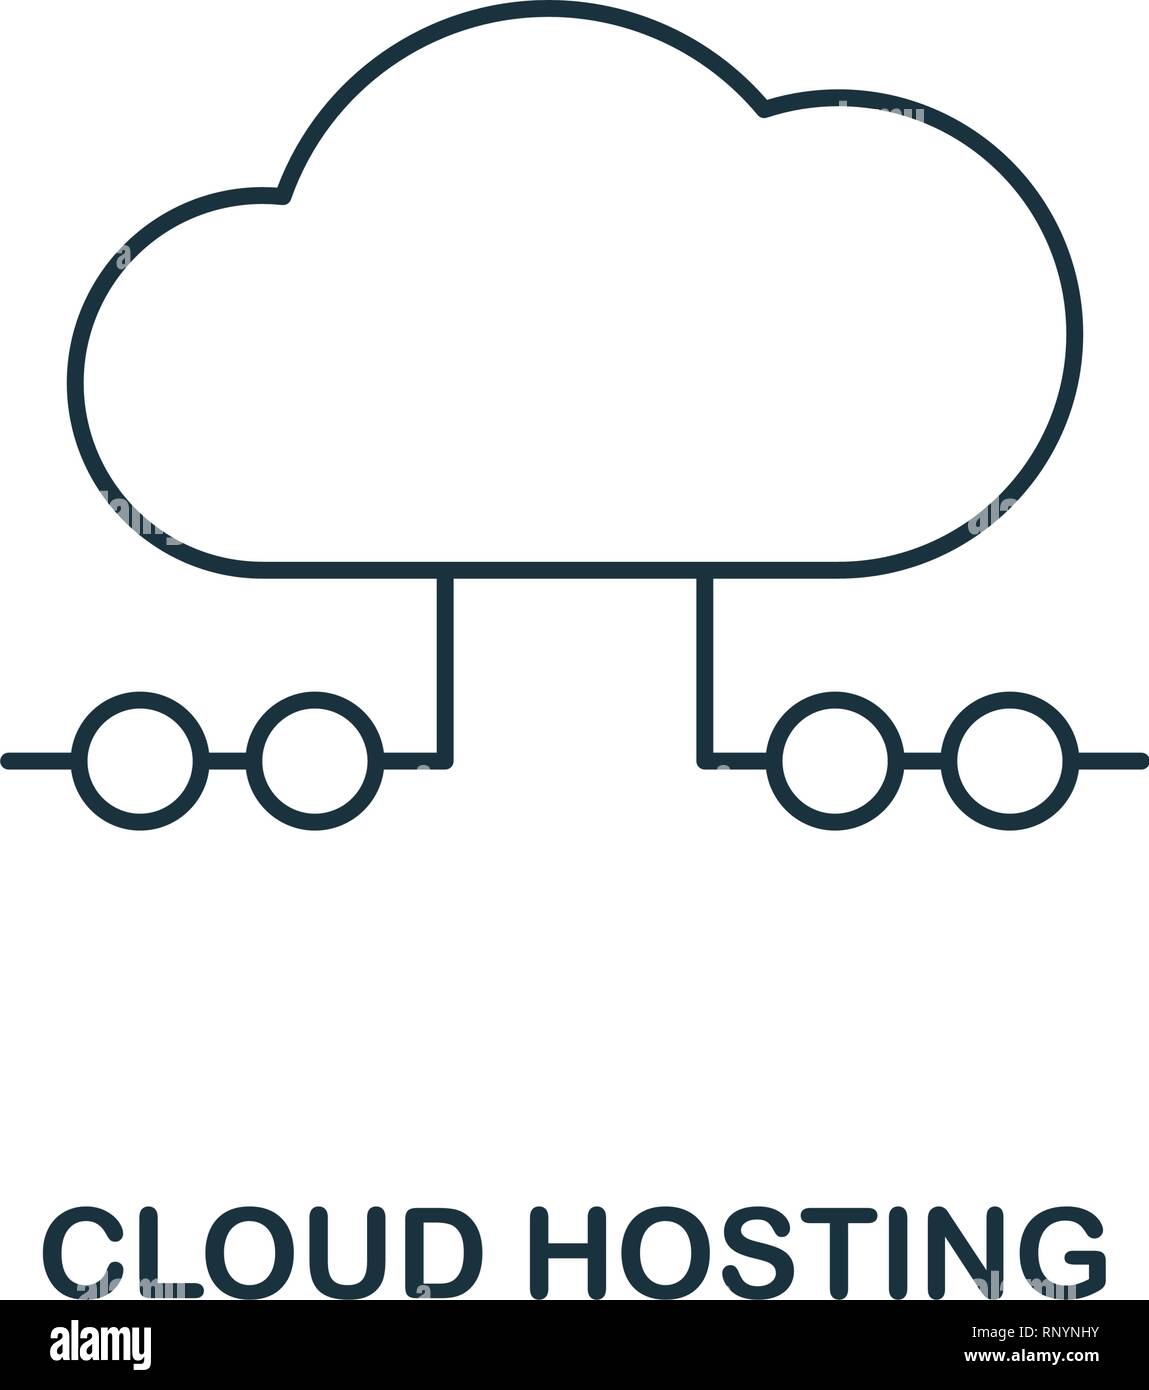 Cloud Hosting outline icon. Thin line style from big data icons collection. Pixel perfect simple element cloud hosting icon for web design, apps Stock Vector